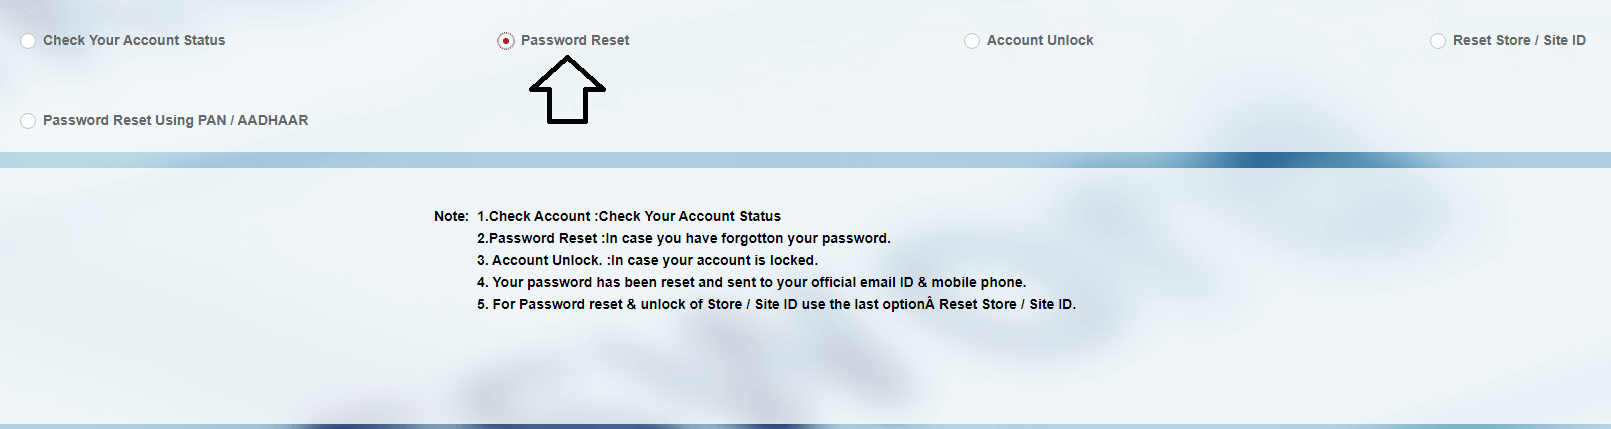 click on password reset option in rconnect ril portal